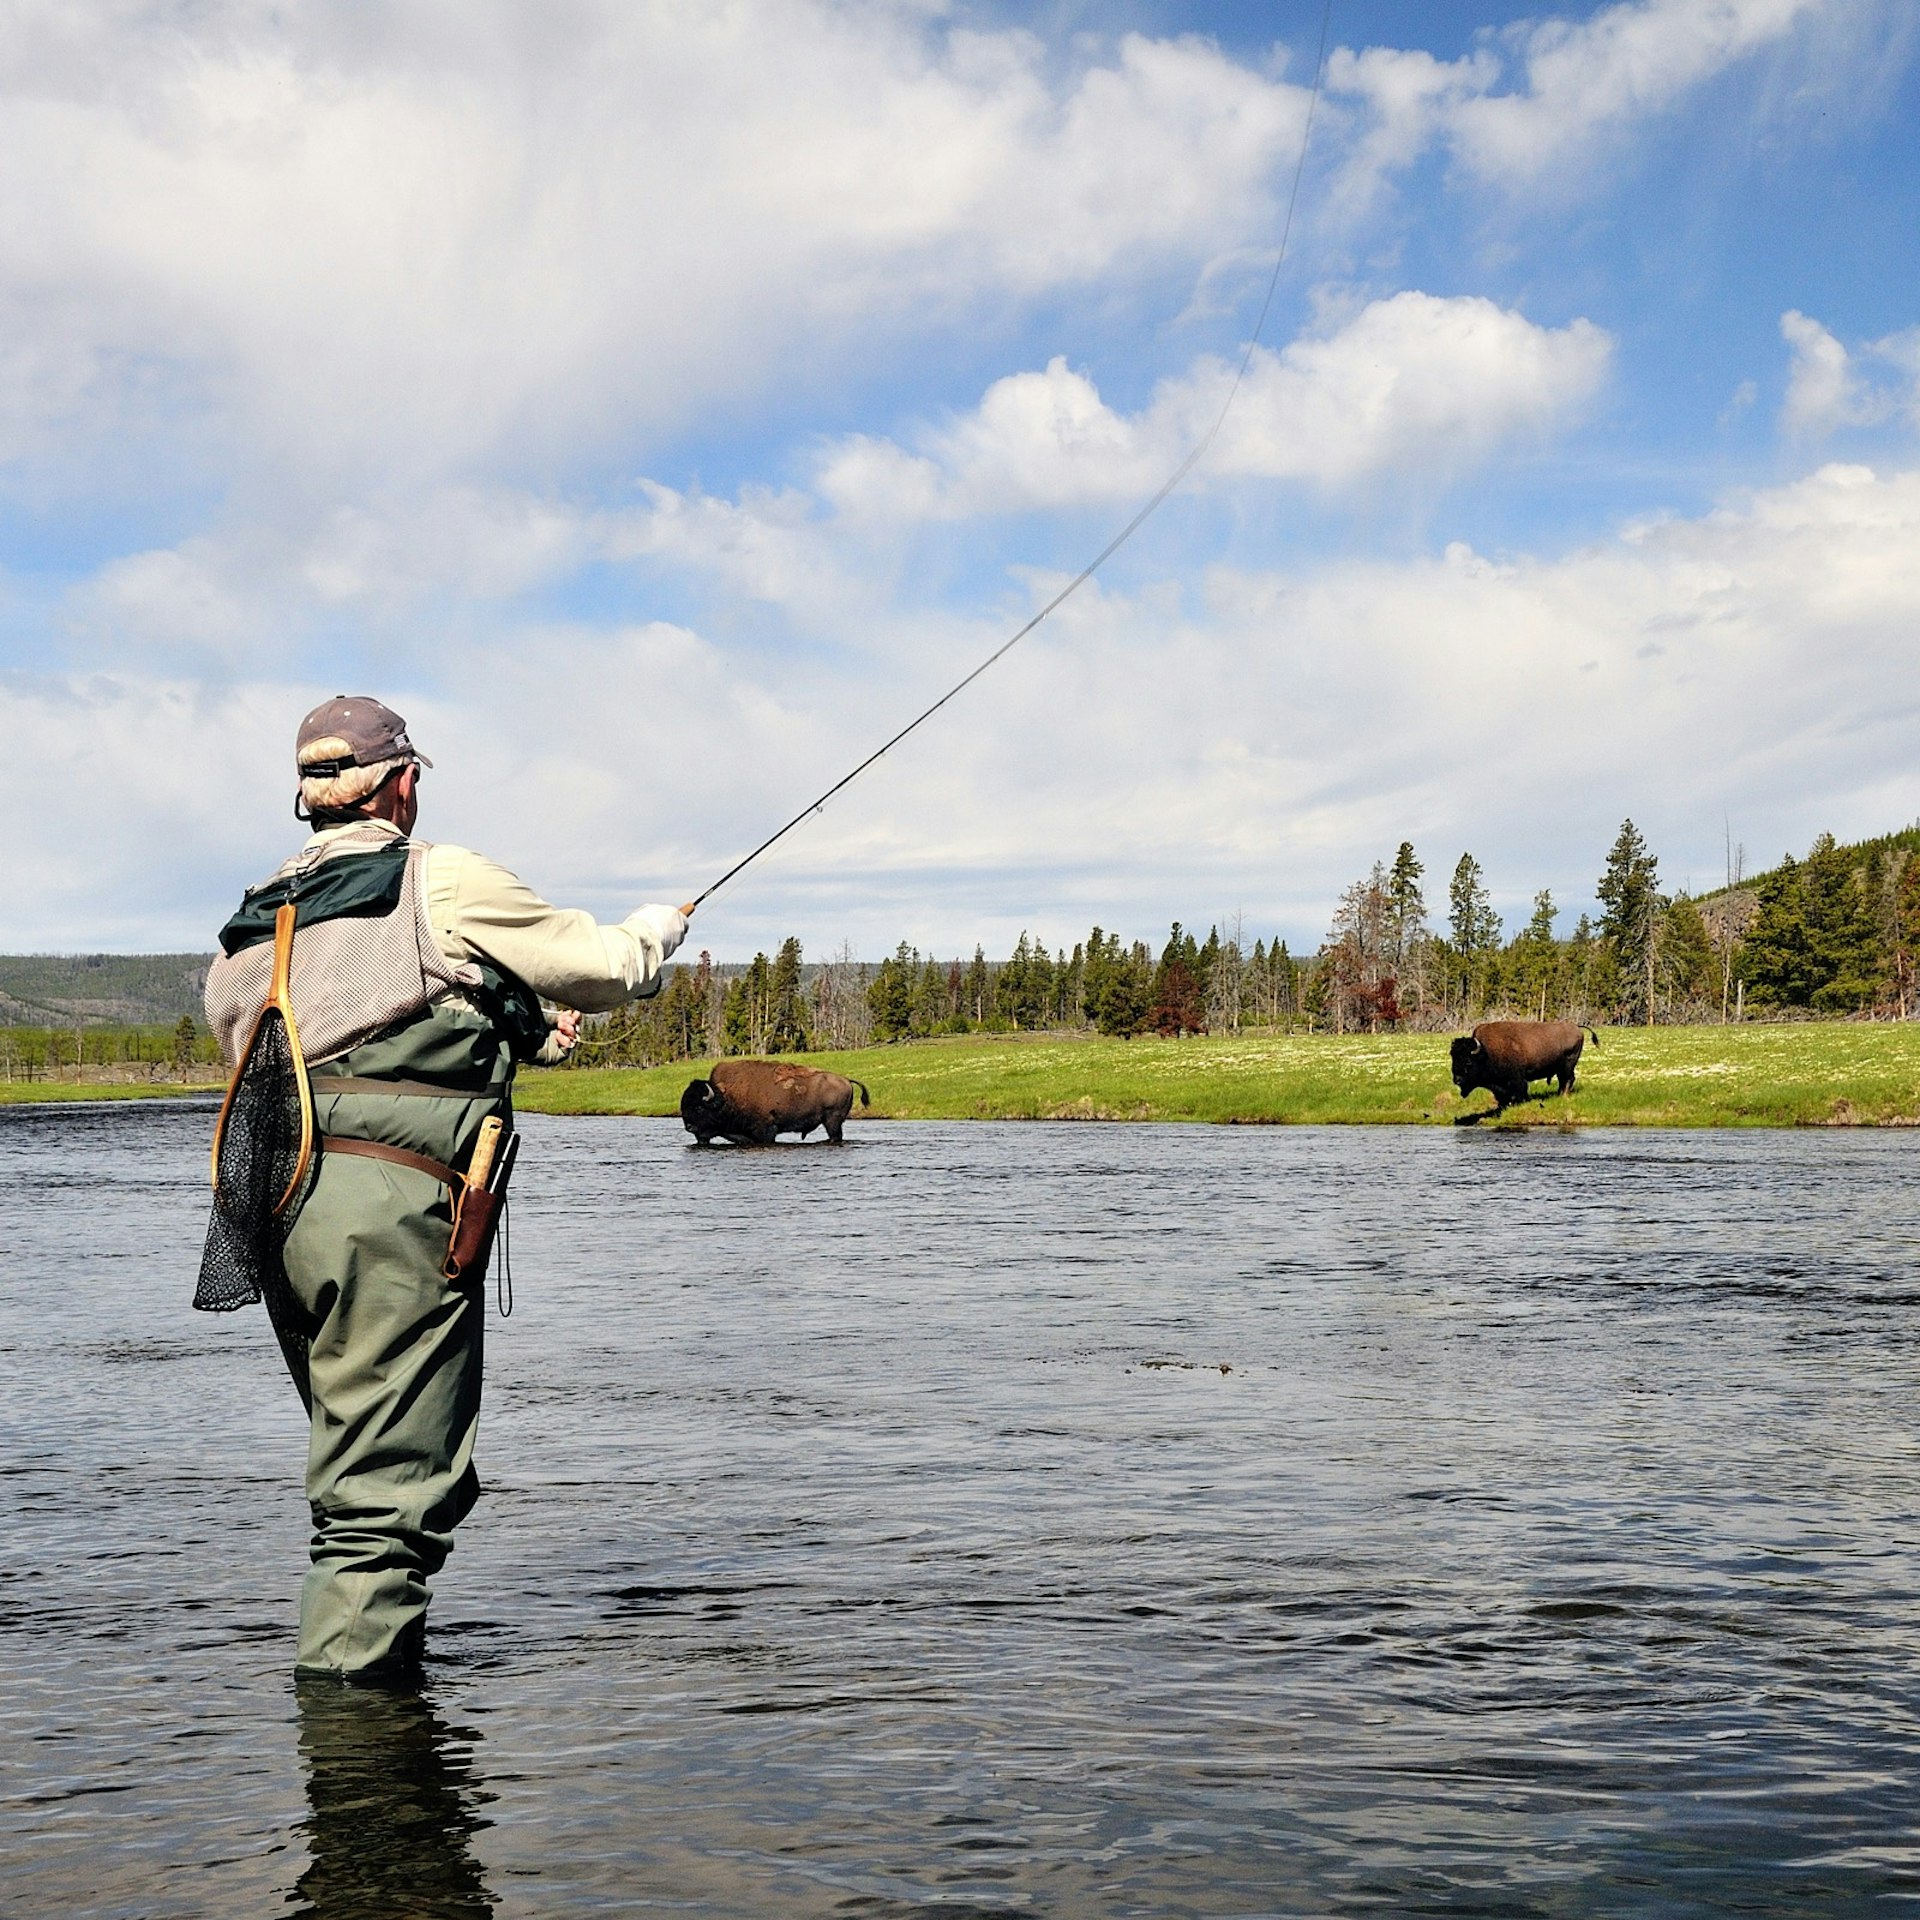 Senior male fishing on the Firehole River in Yellowstone, with a pair of bison fording the water in the background.